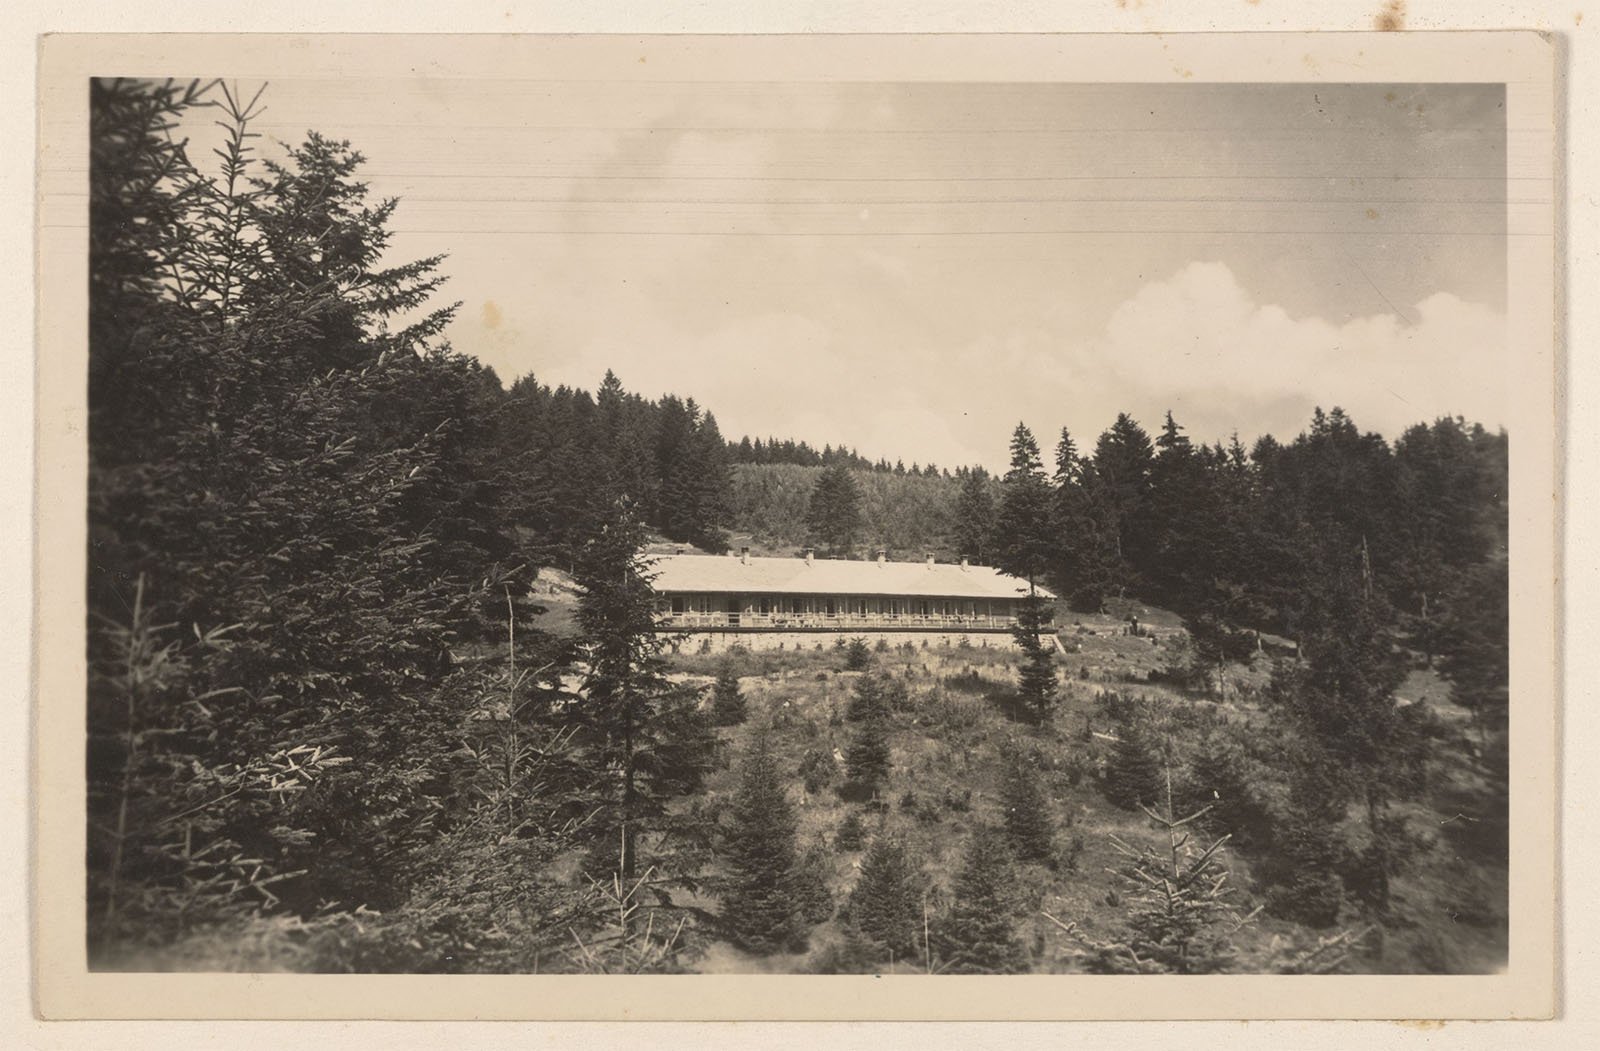 A black-and-white photograph of a wooded landscape with a long, single-story building partially visible through the trees. The building is surrounded by dense forest, with power lines running above it against a cloudy sky. The image has a vintage, sepia tone.